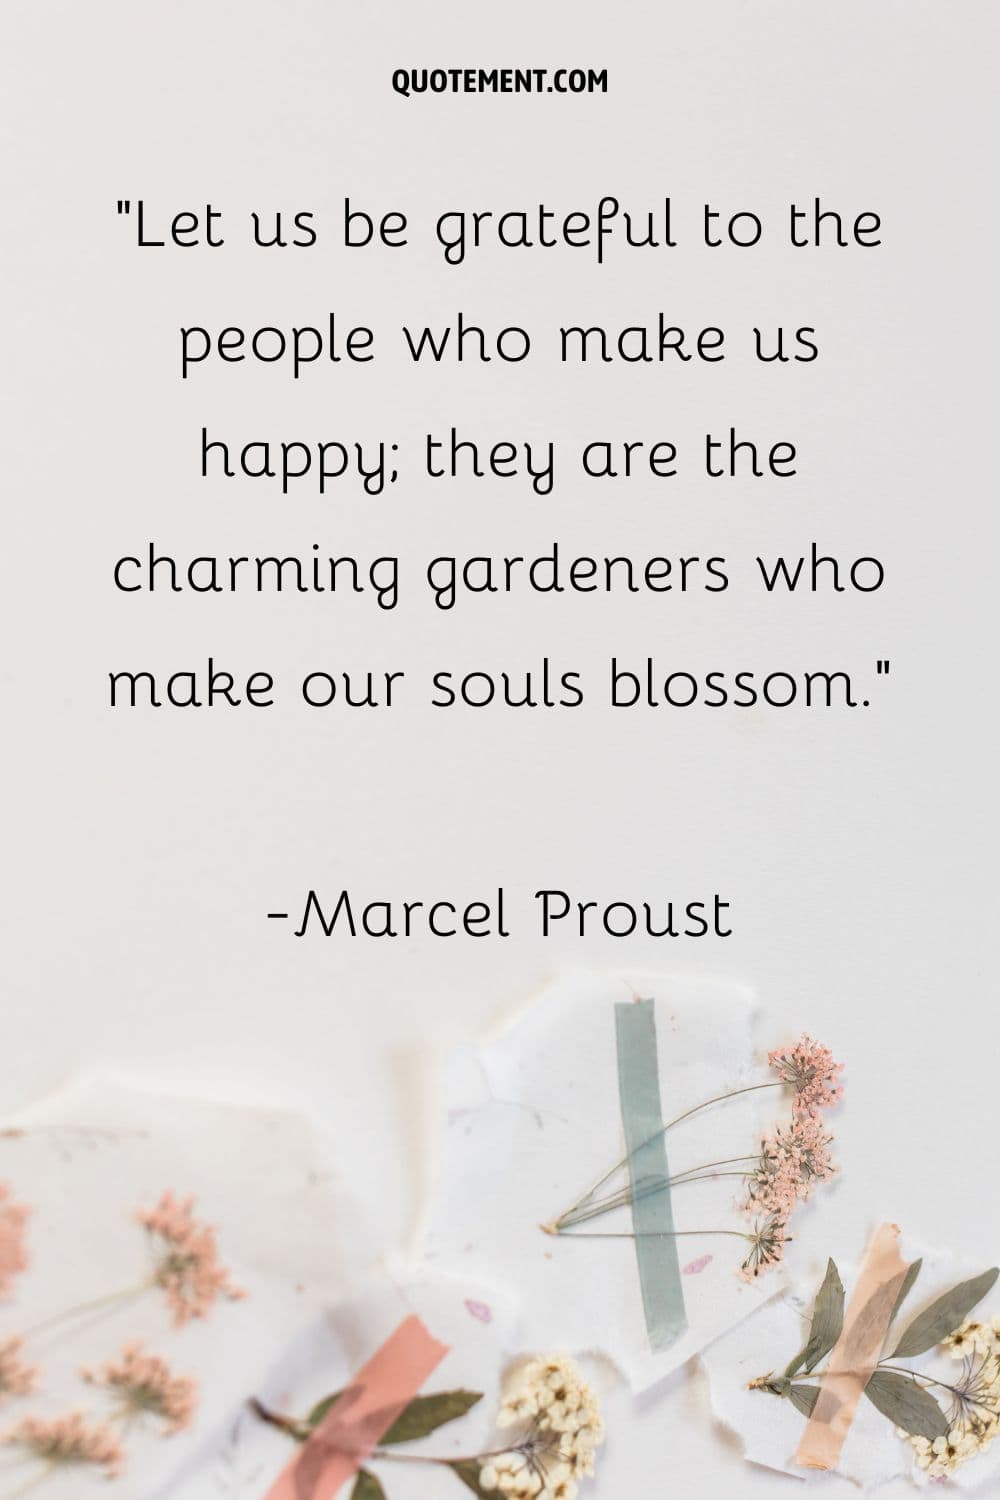 A beautiful quote paired with delicate flowers.